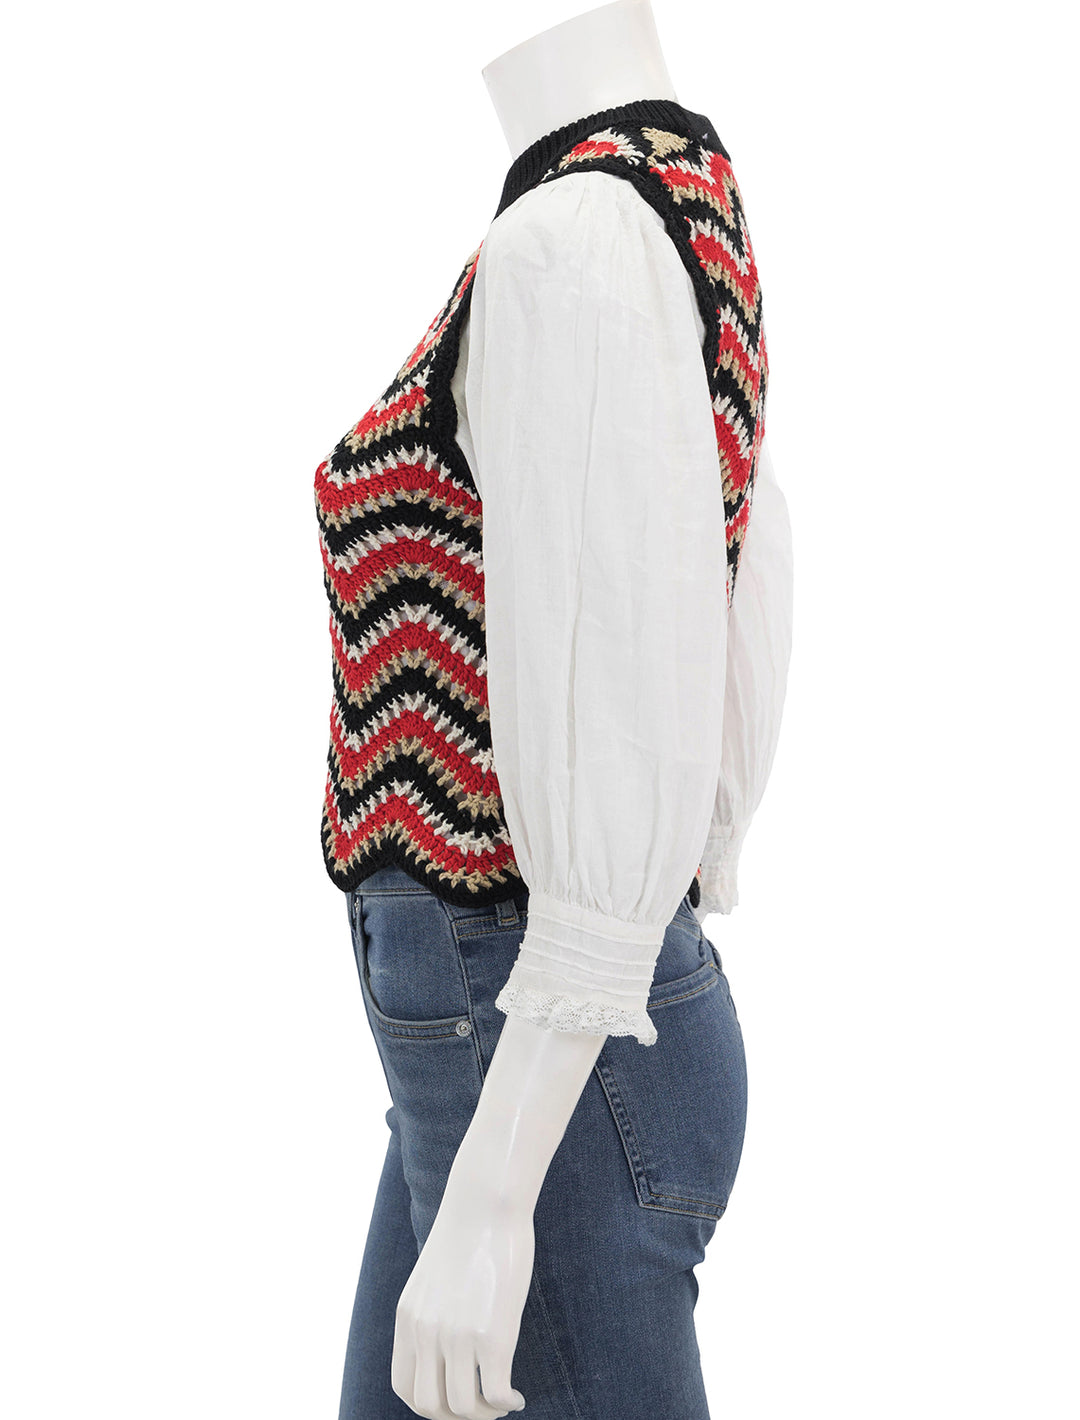 Side view of Ganni's cotton crochet vest in racing red.